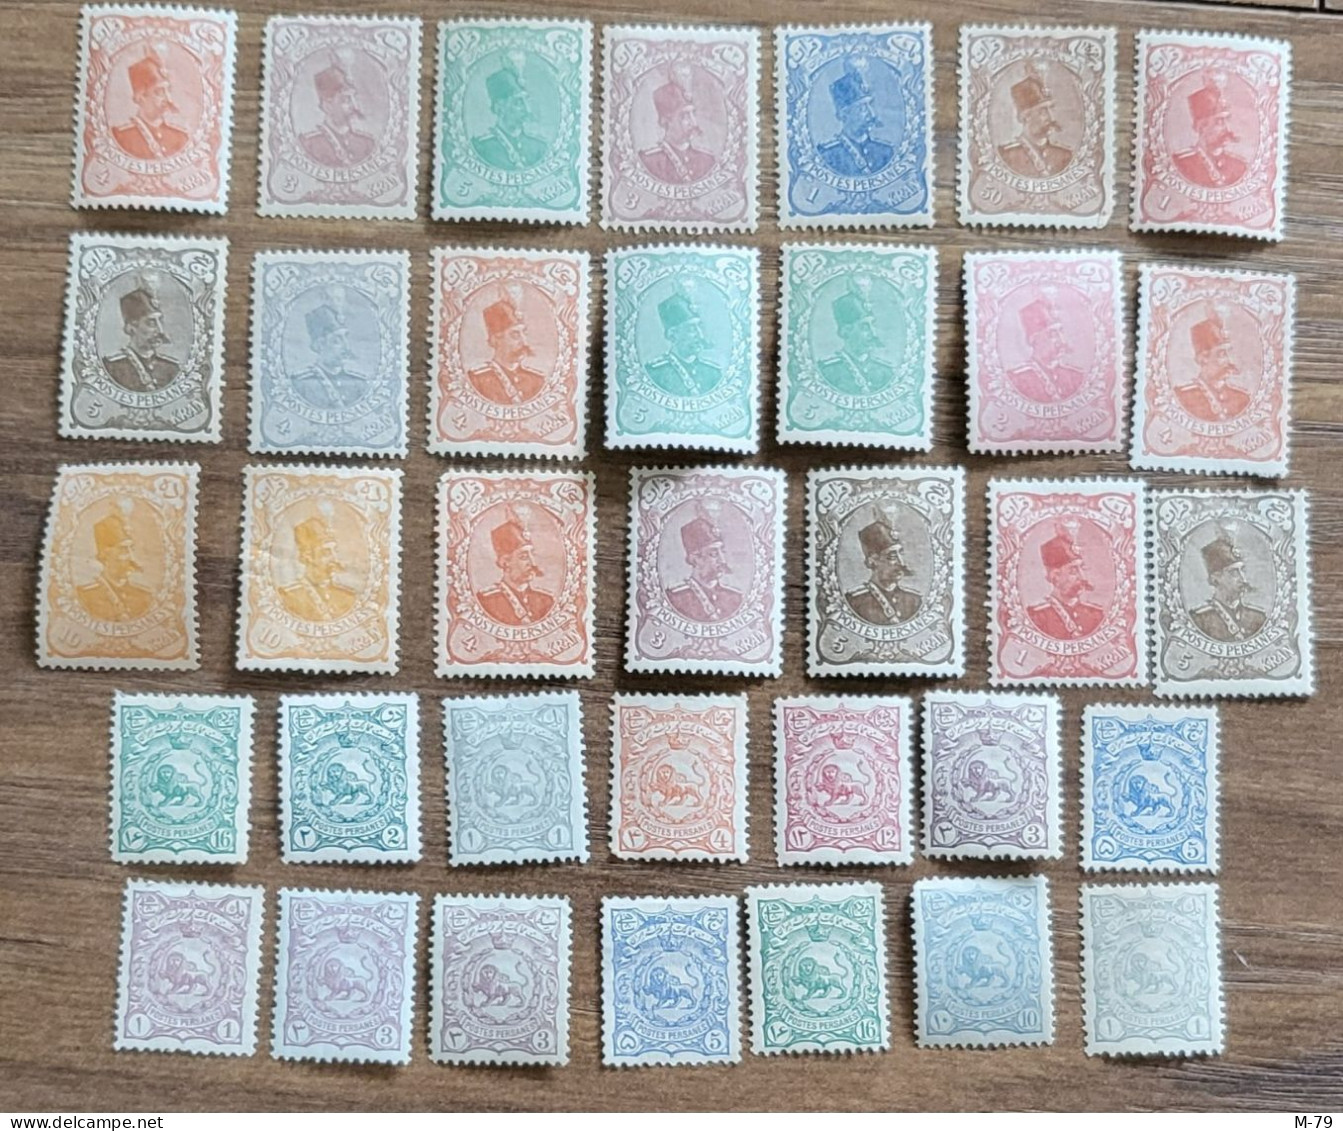 Iran/Persia - Qajar Mix stamps Collection - Singles - Blocks - Surcharge - MNH - MH - OG -  a few No GUM